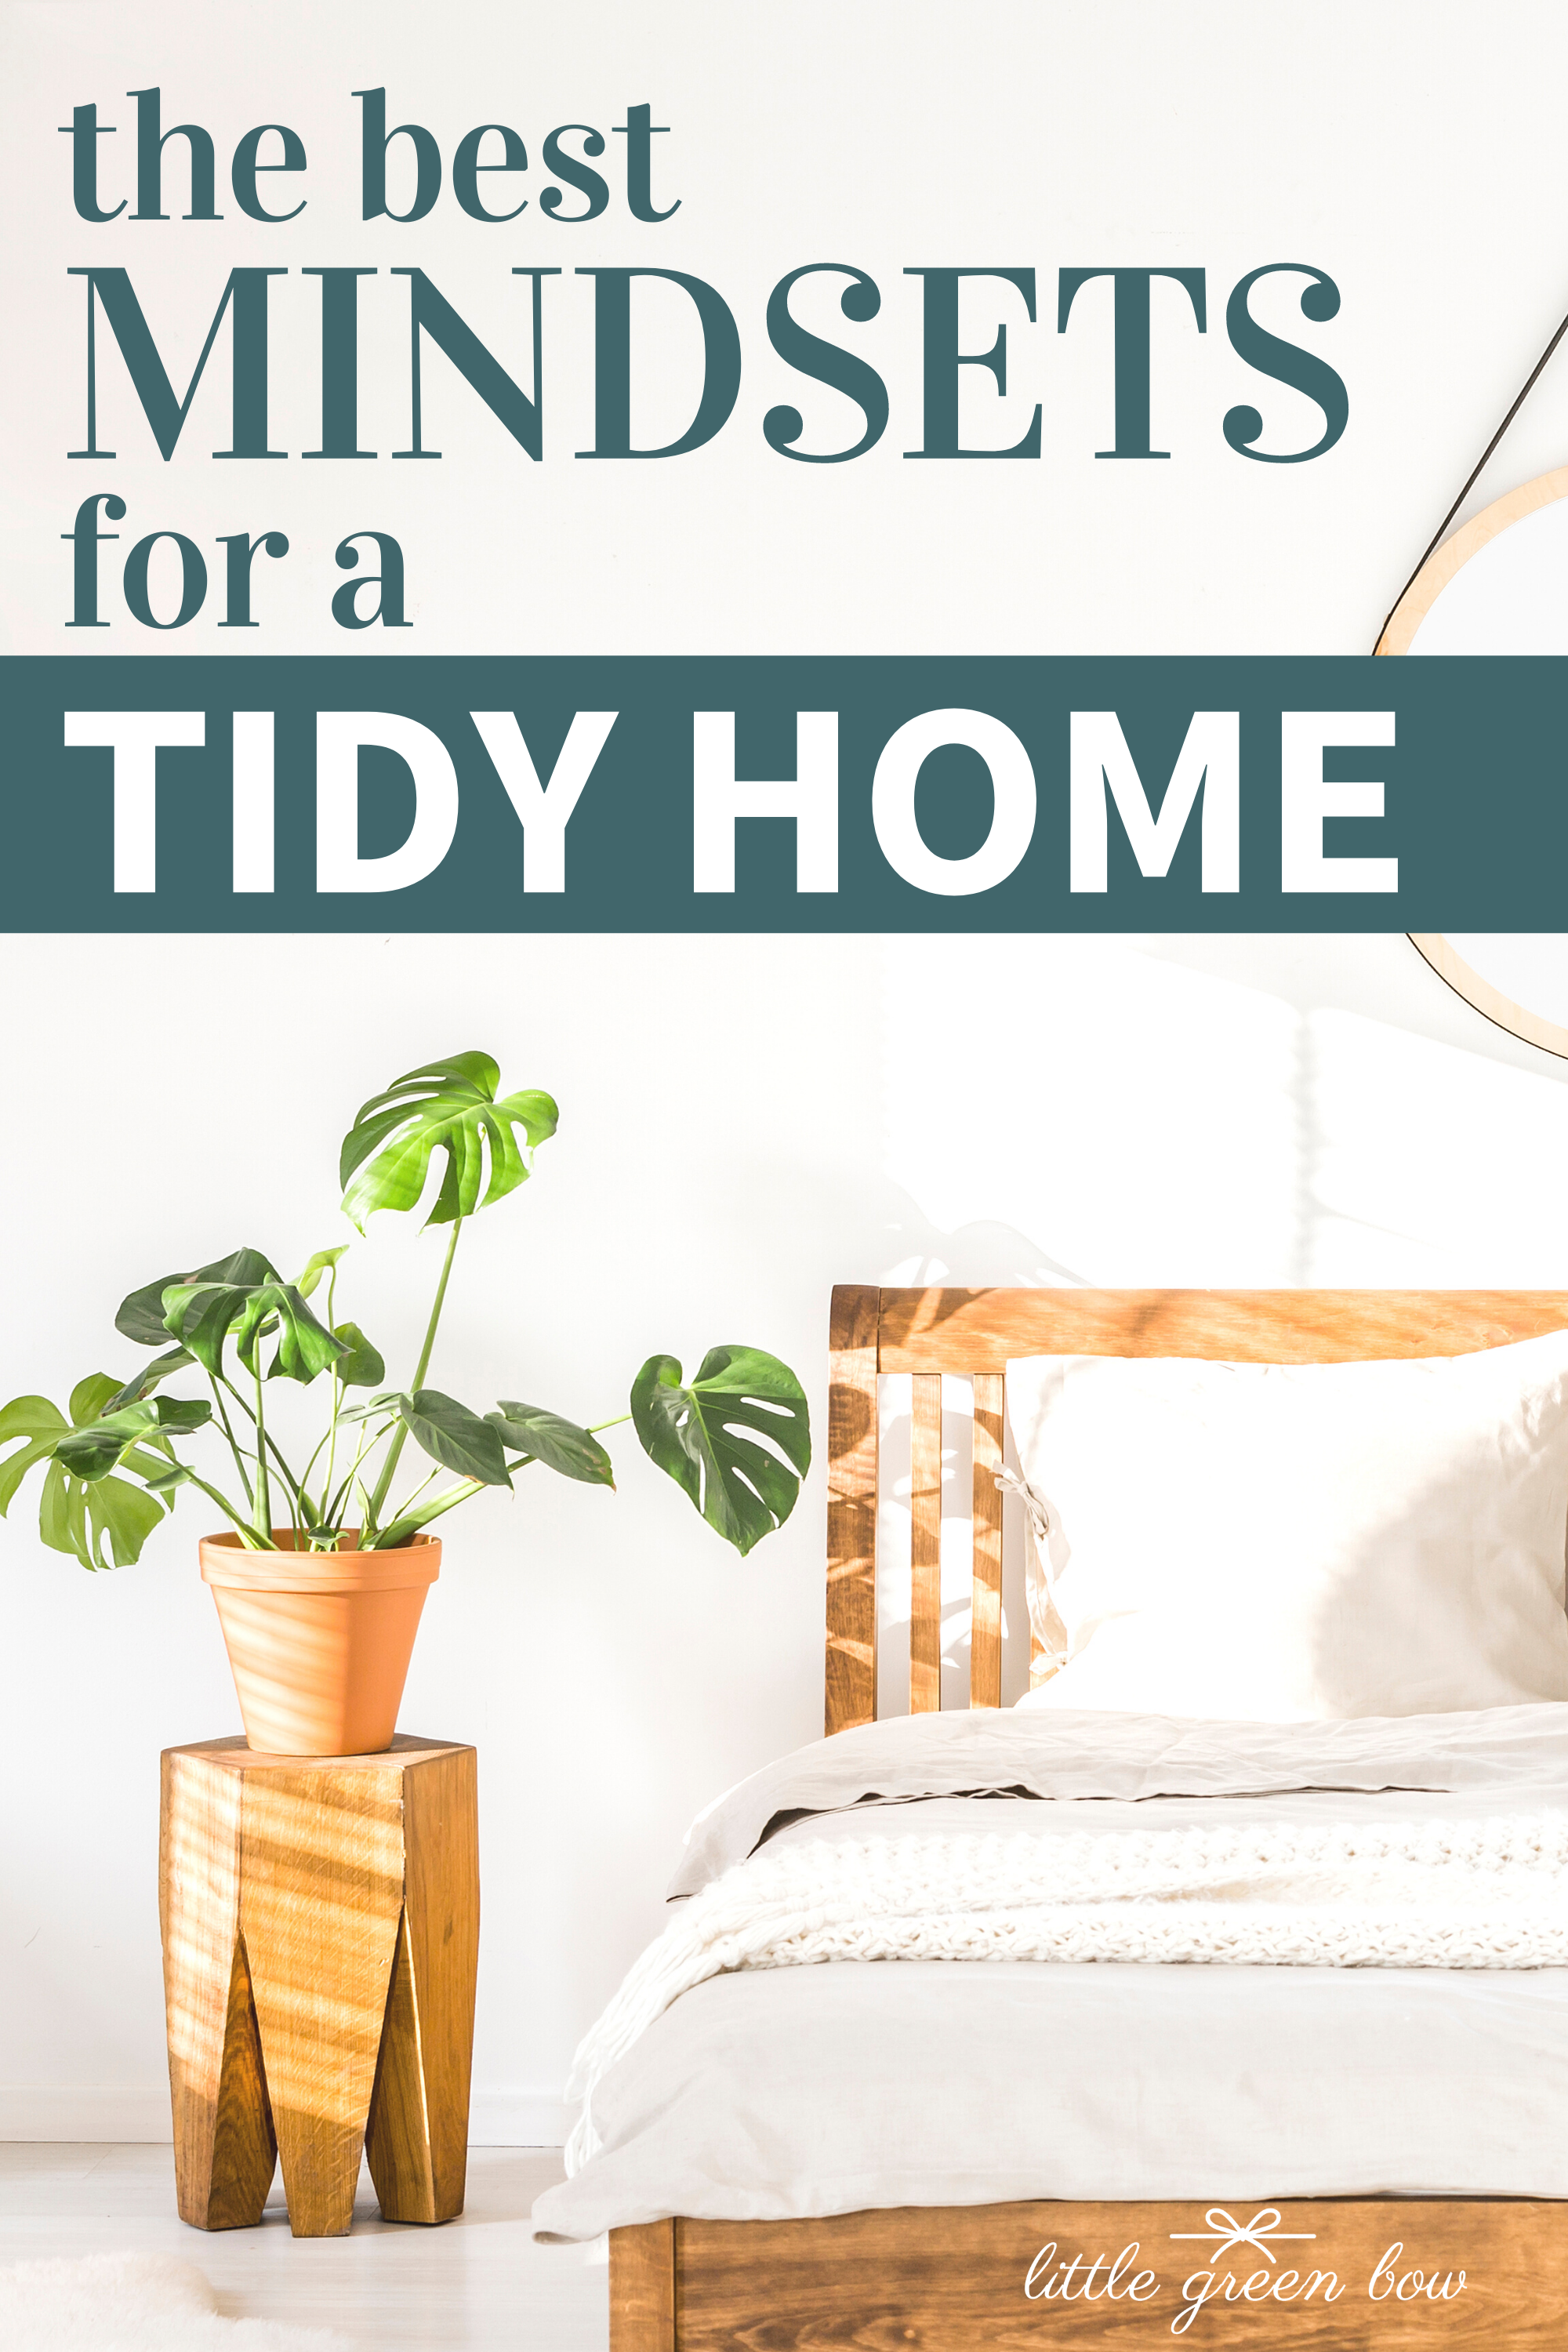 The Best Mindsets for a Tidy Home